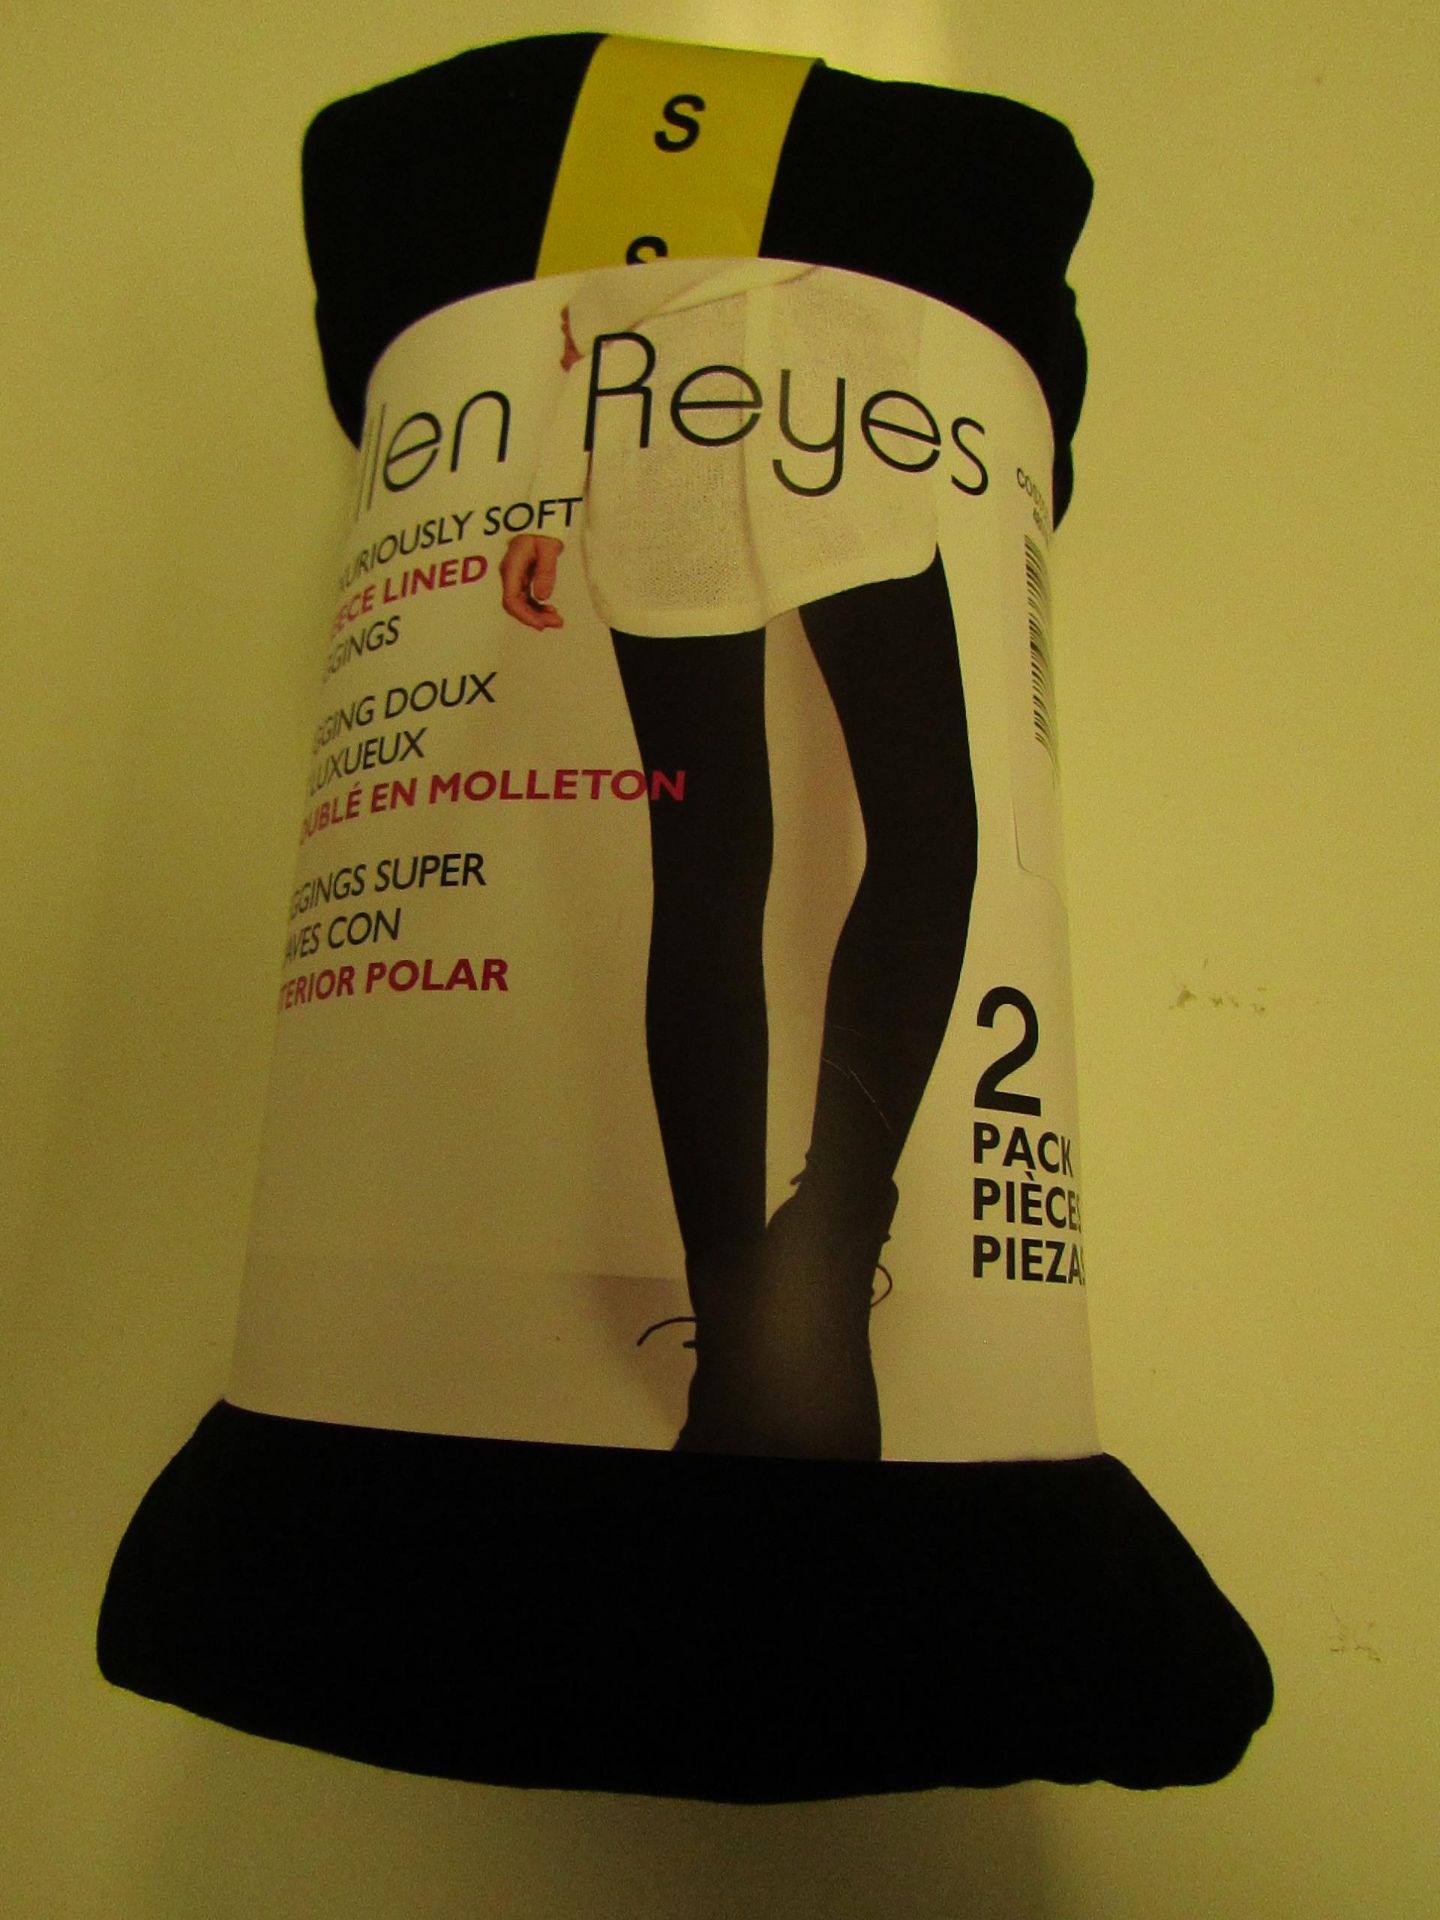 1 X PK of 2 Ellen Reyes Leggings Black Size S New & Packaged ( Some May Come With a Grey Pair Picked